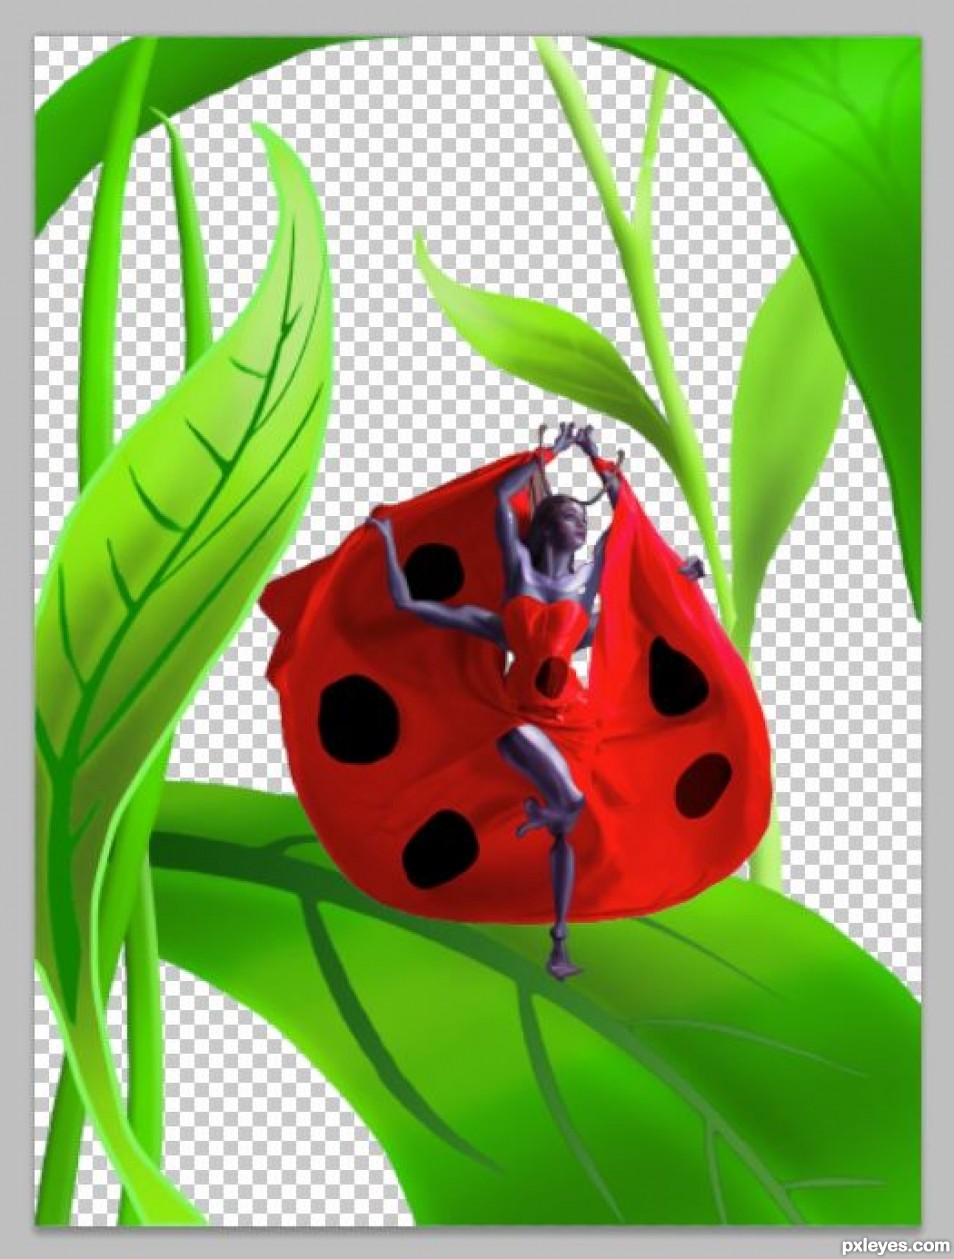 Creation of Does this lady bug you?: Step 7